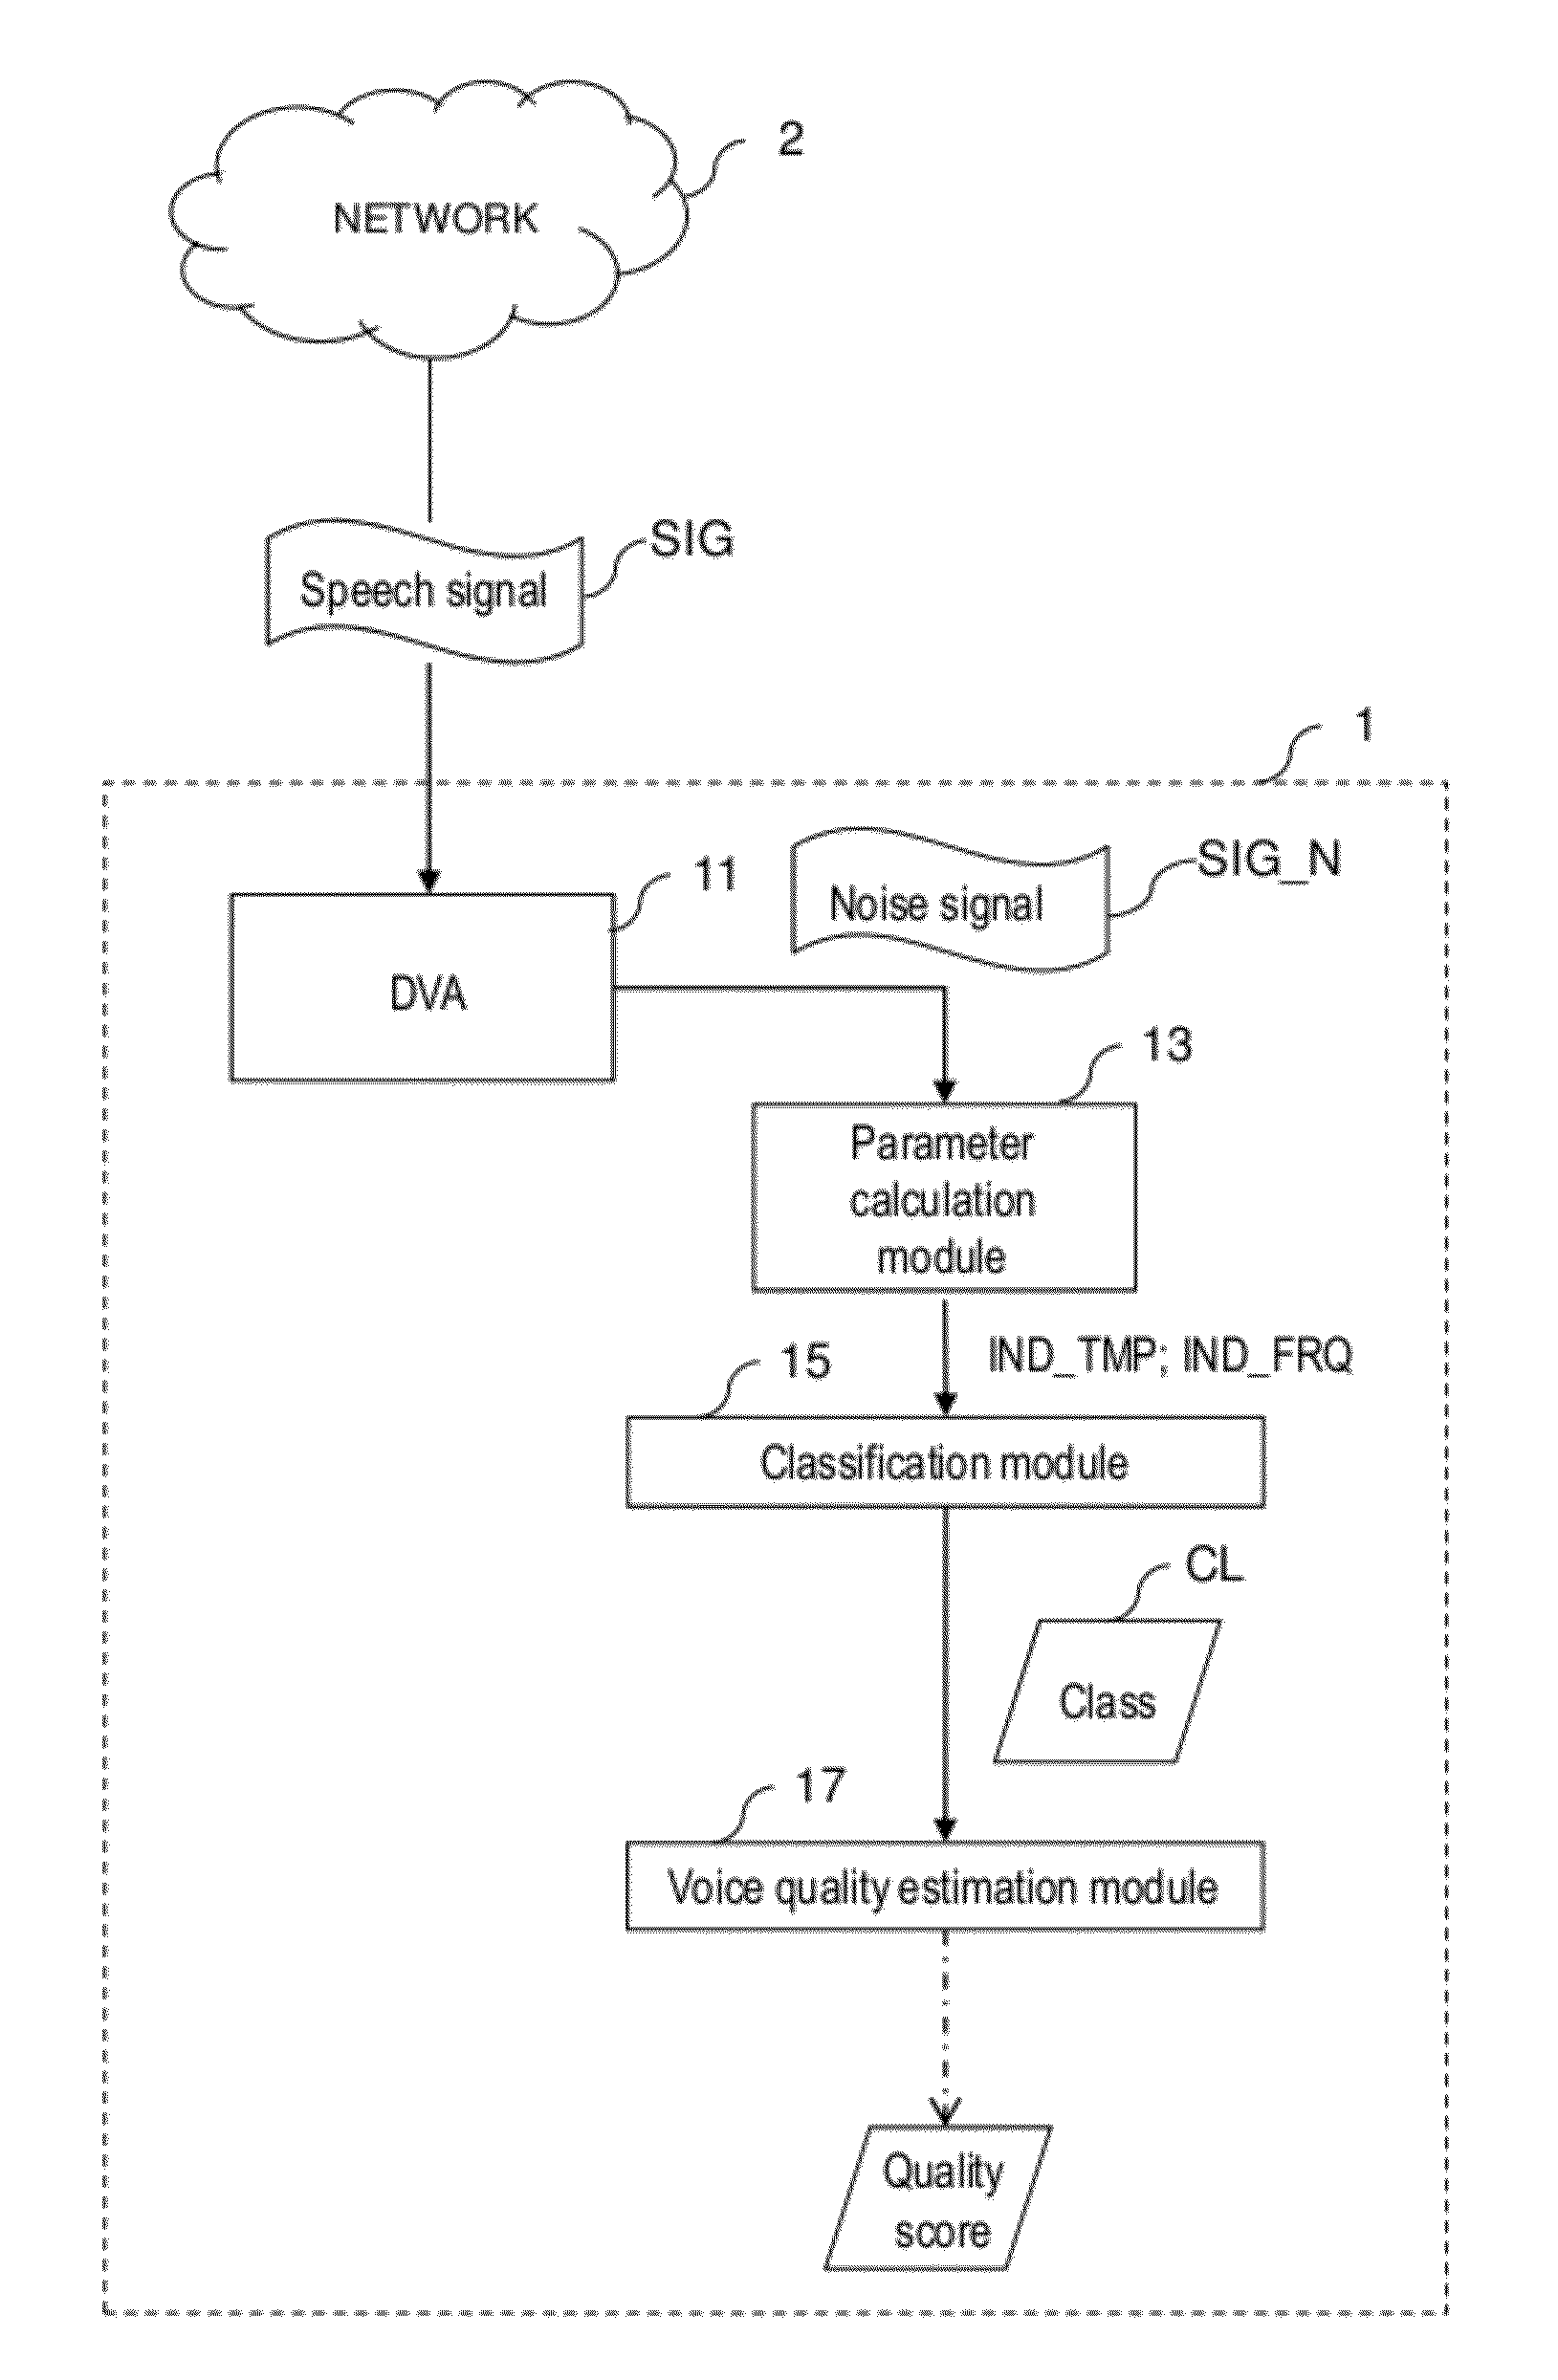 Method and device for the objective evaluation of the voice quality of a speech signal taking into account the classification of the background noise contained in the signal